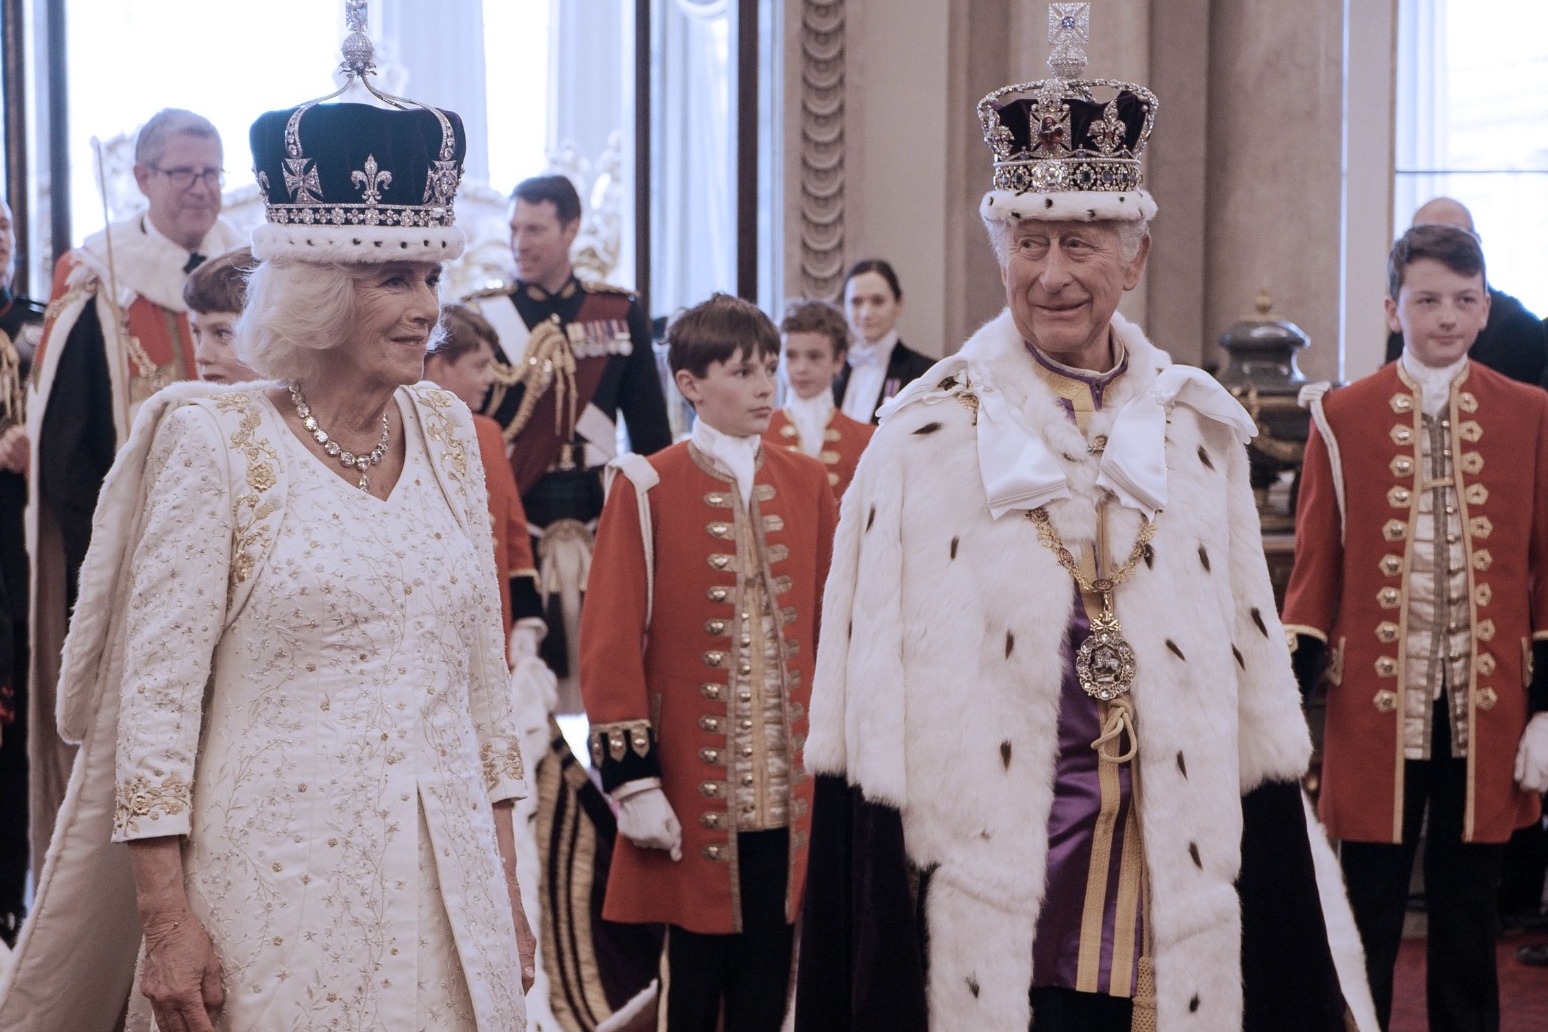 Queen shows ‘relief’ after coronation, new documentary reveals 